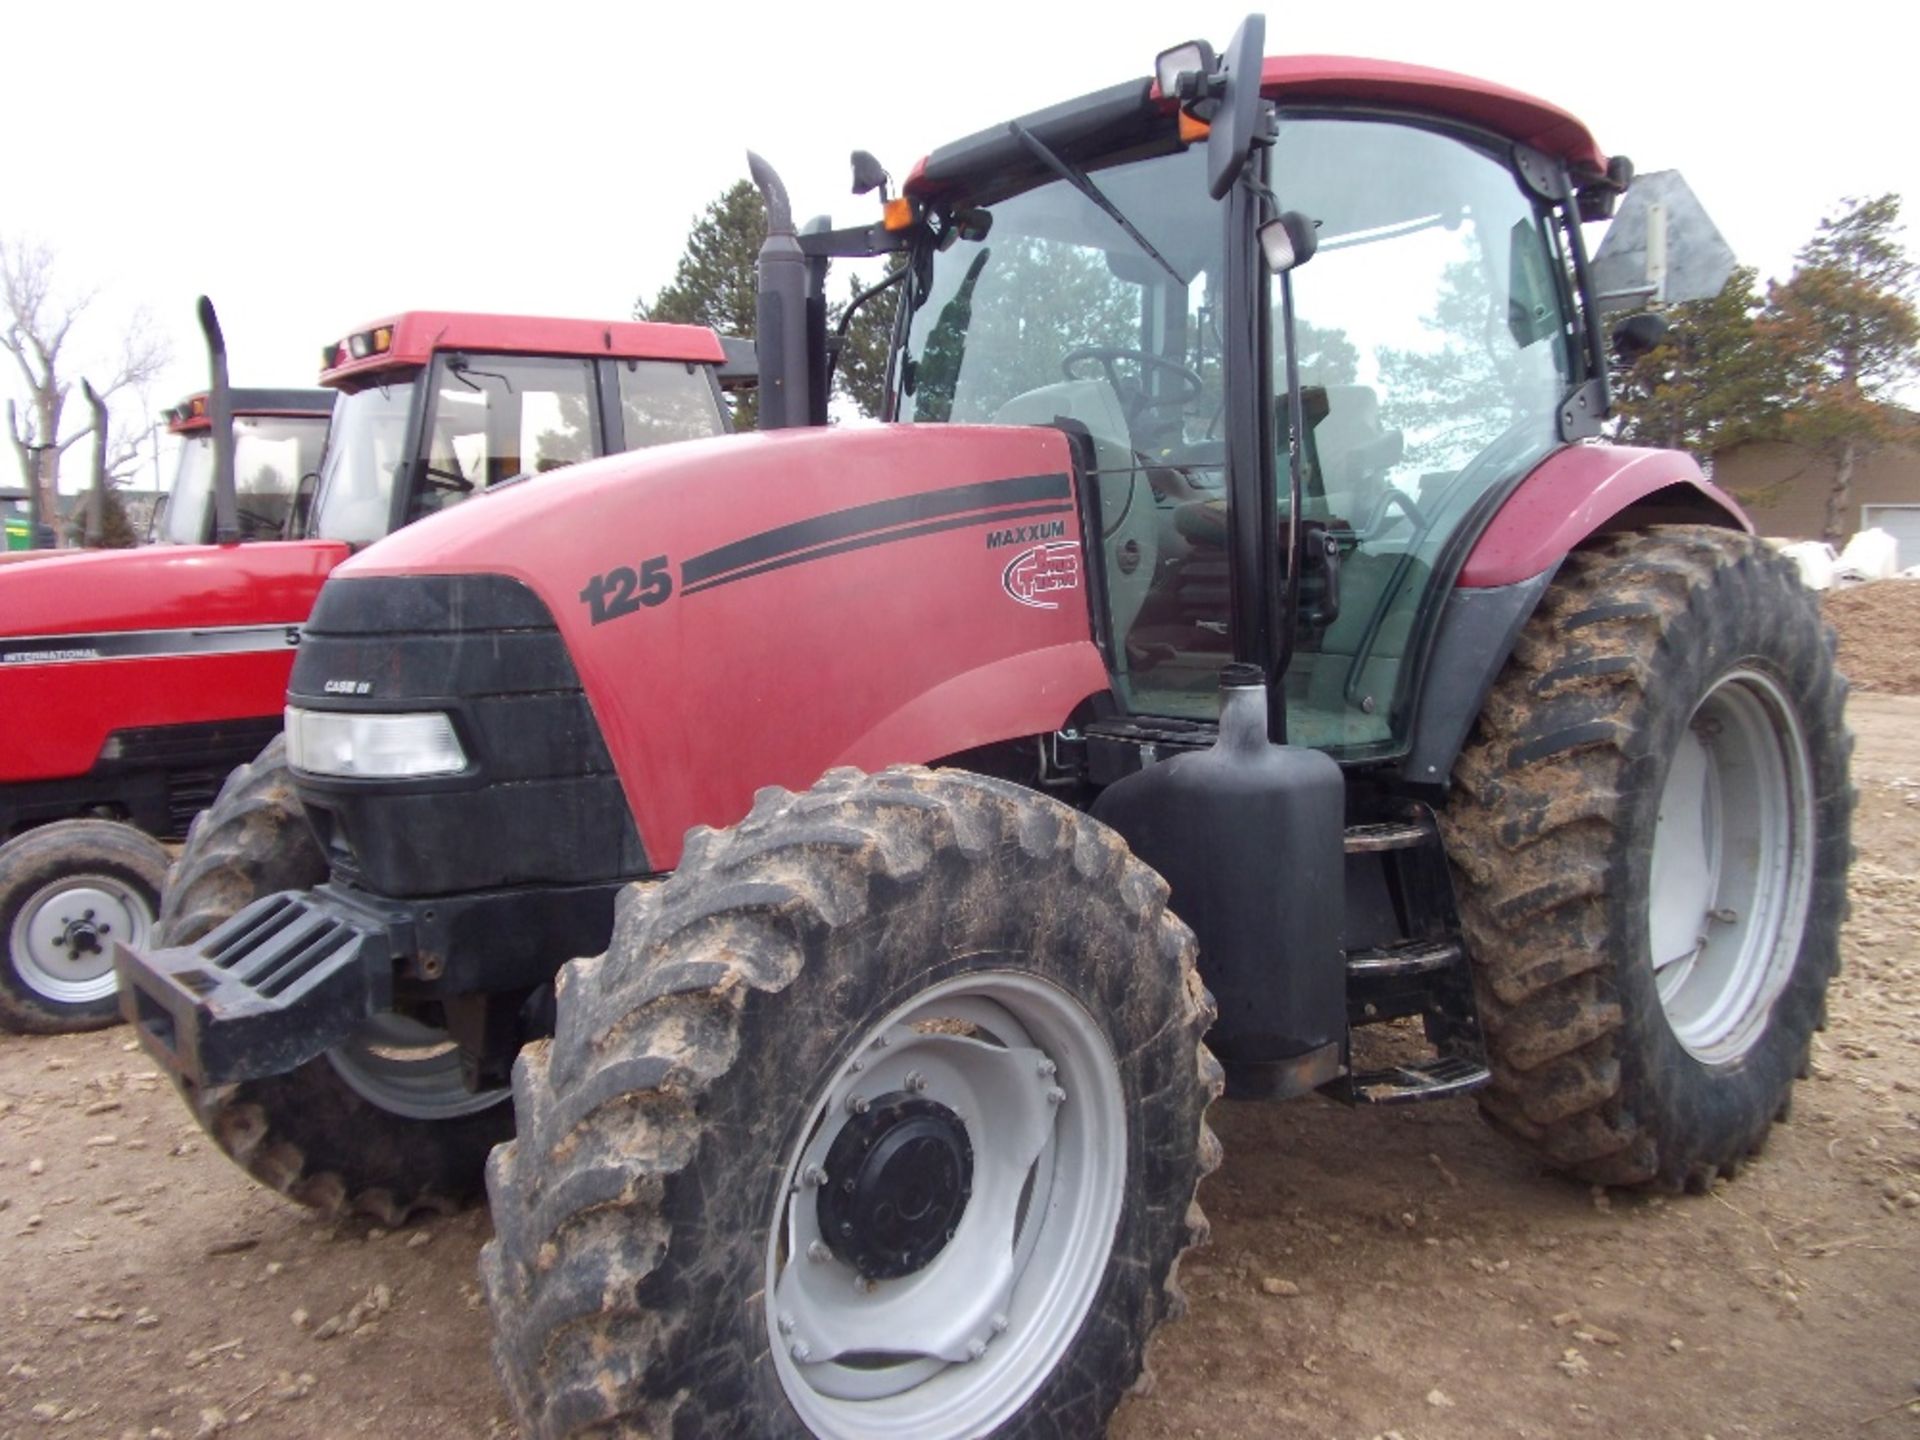 Case IH 125 MFWD power shift trans. 2 hyd remotes 18.4x38 rubber new hyd. pump 7190 hrs.